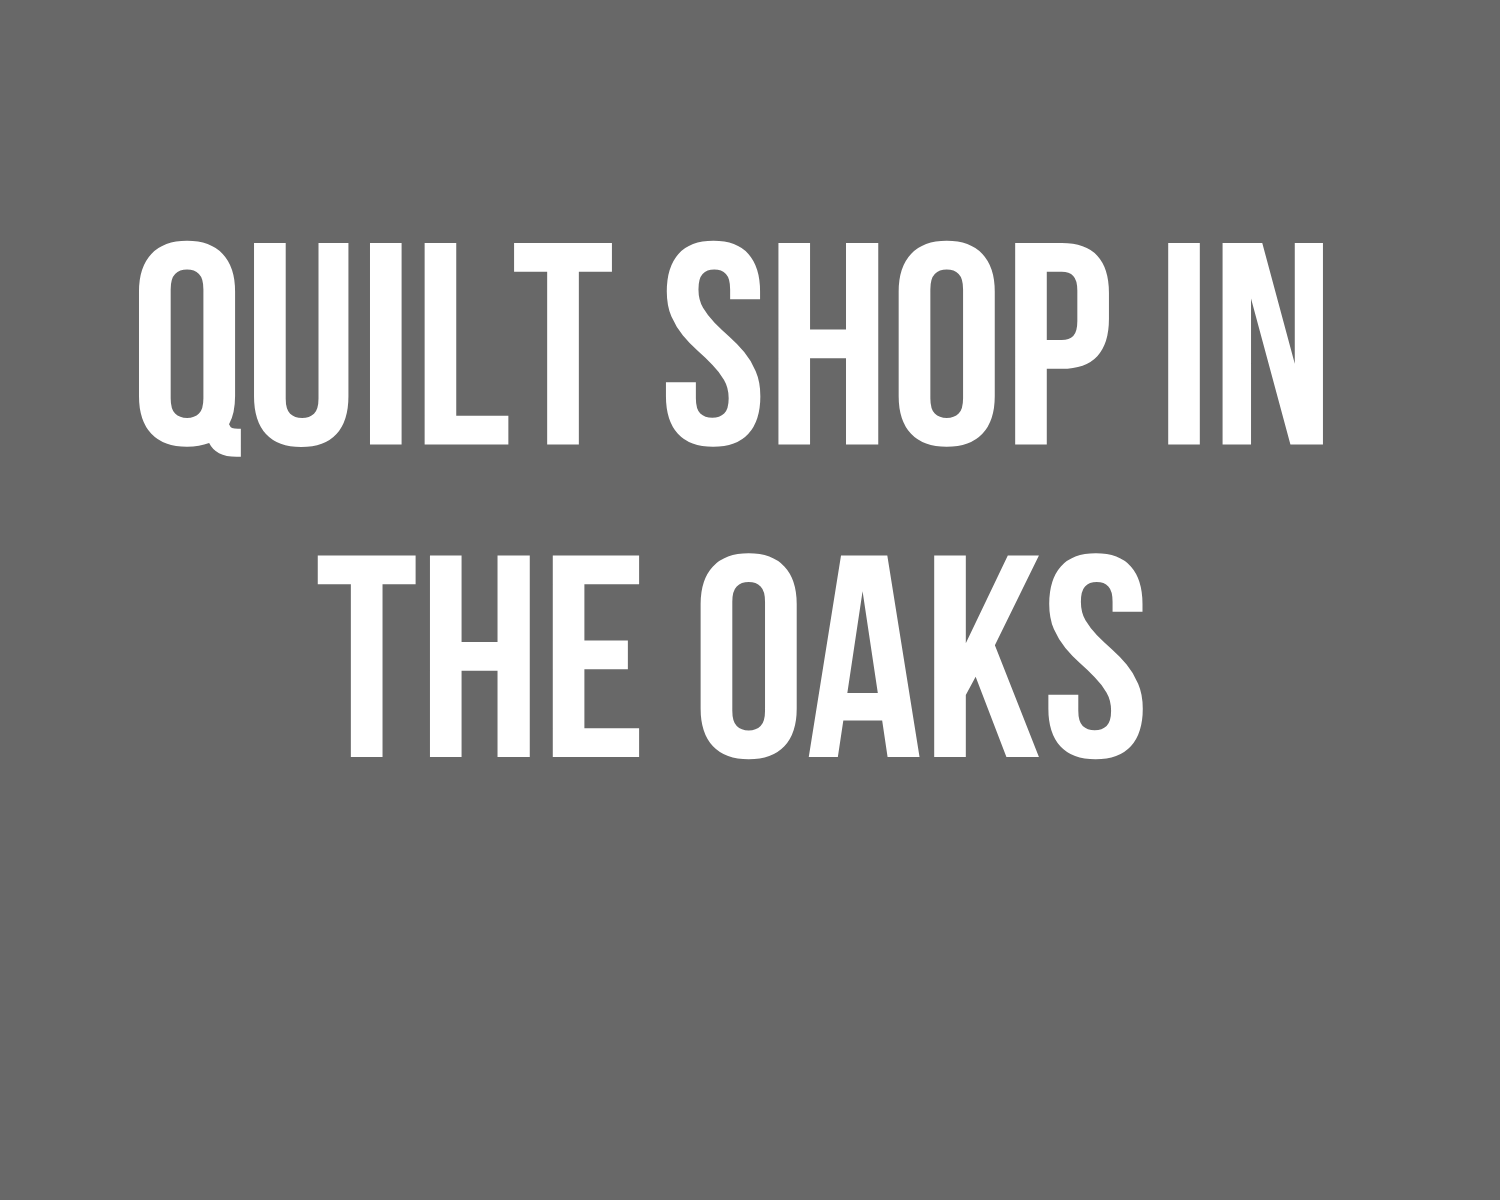 Quilt Shop in the Oaks